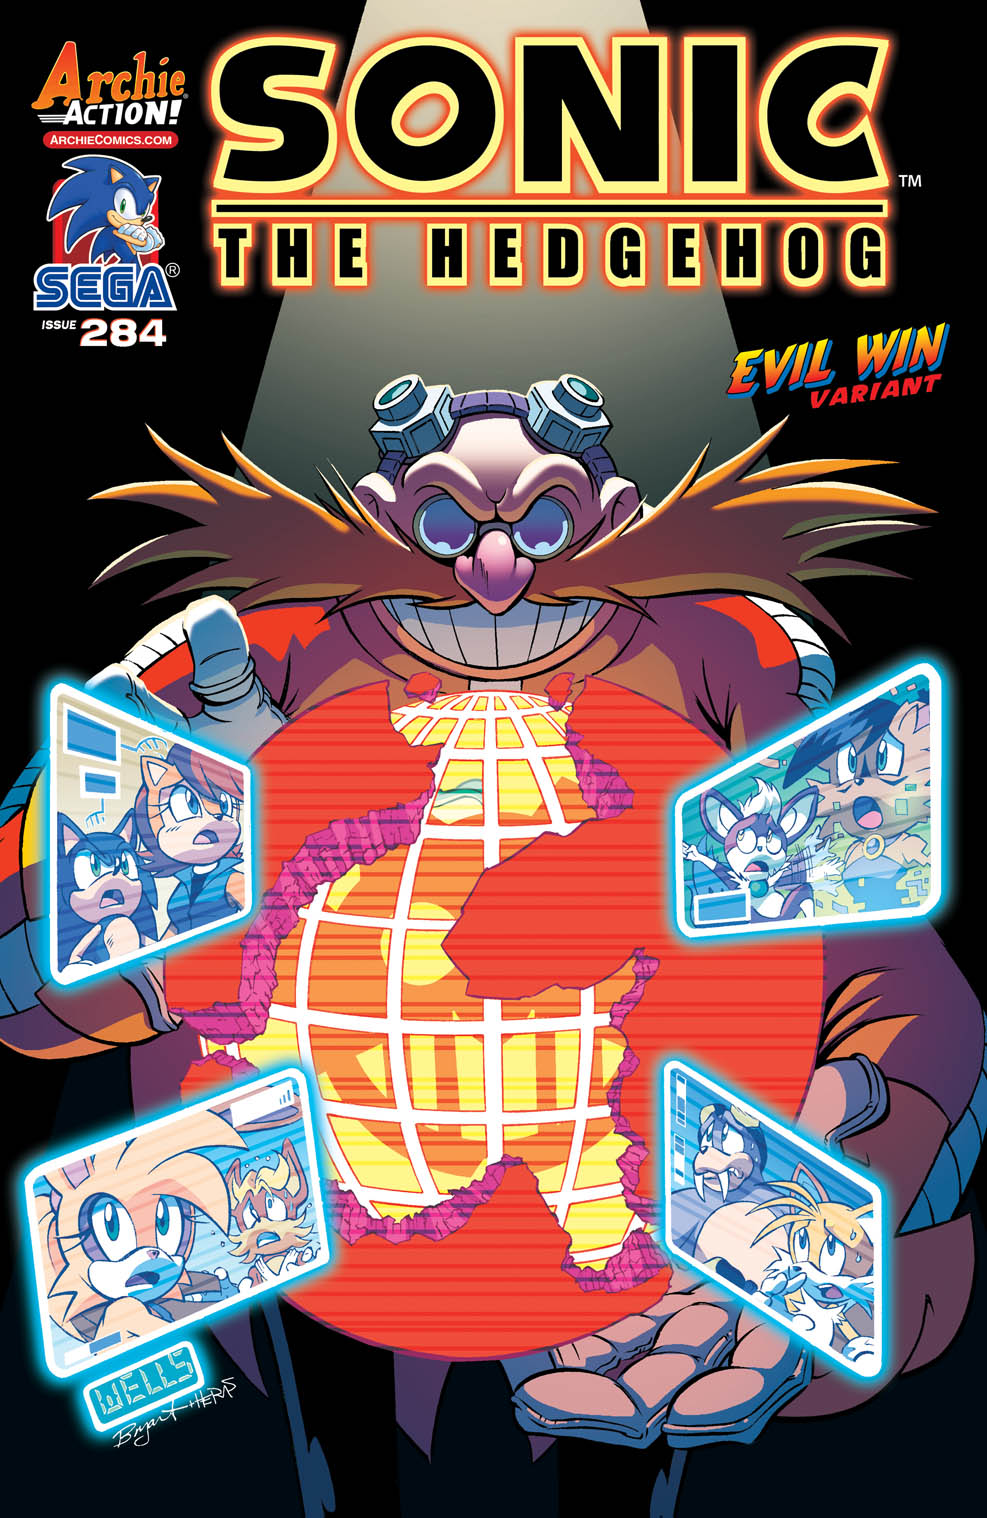 Sonic the Hedgehog #284 Cover